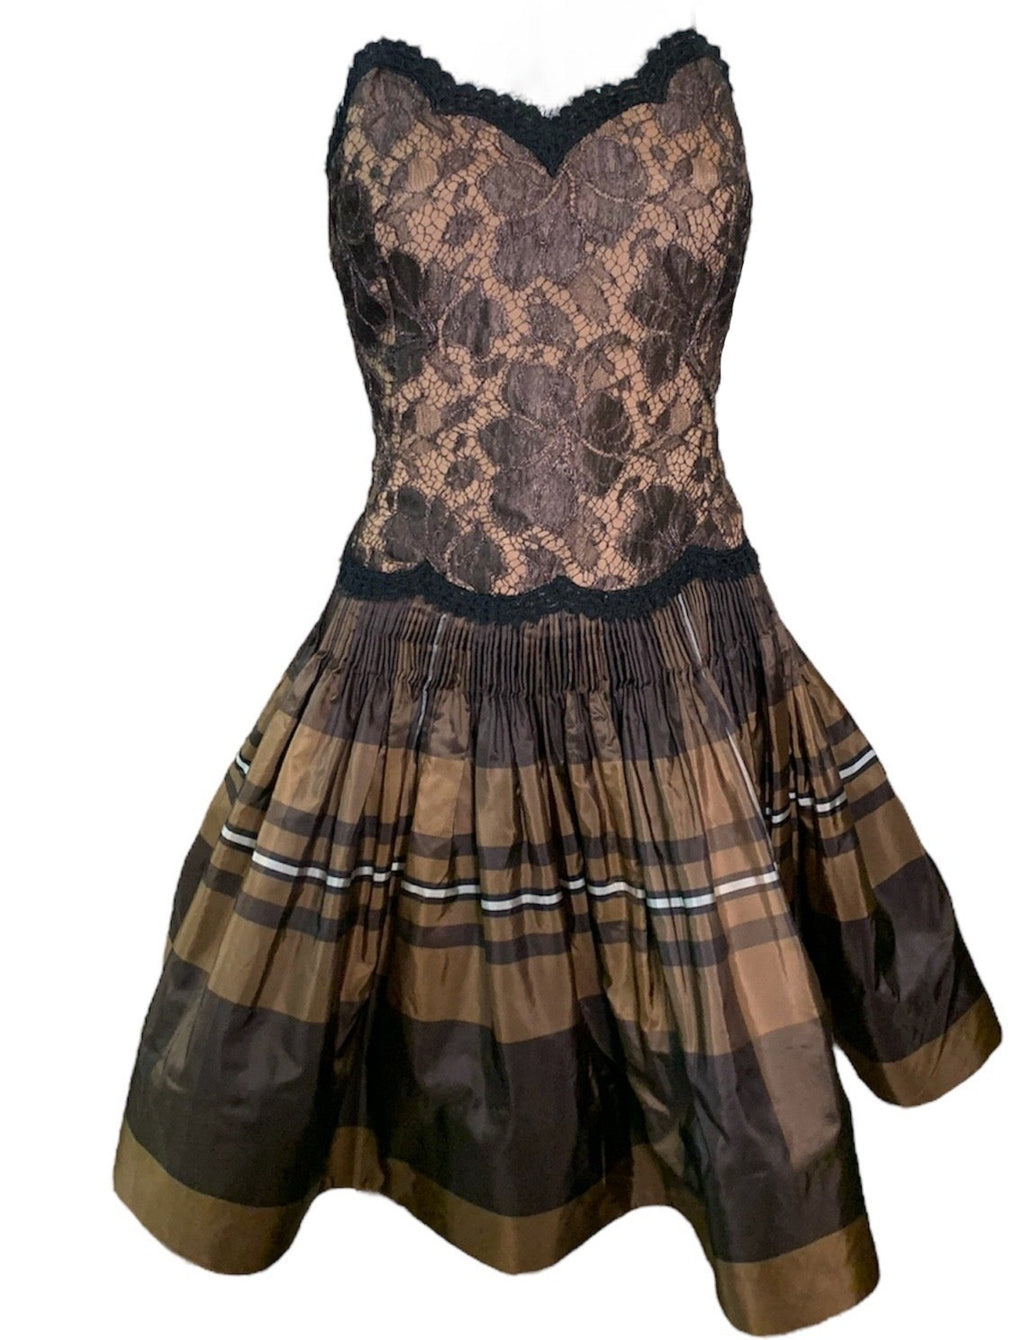 Geoffrey Beene 90s Brown Taffeta and Lace Tartan Cocktail Dress FRONT 1 of 7